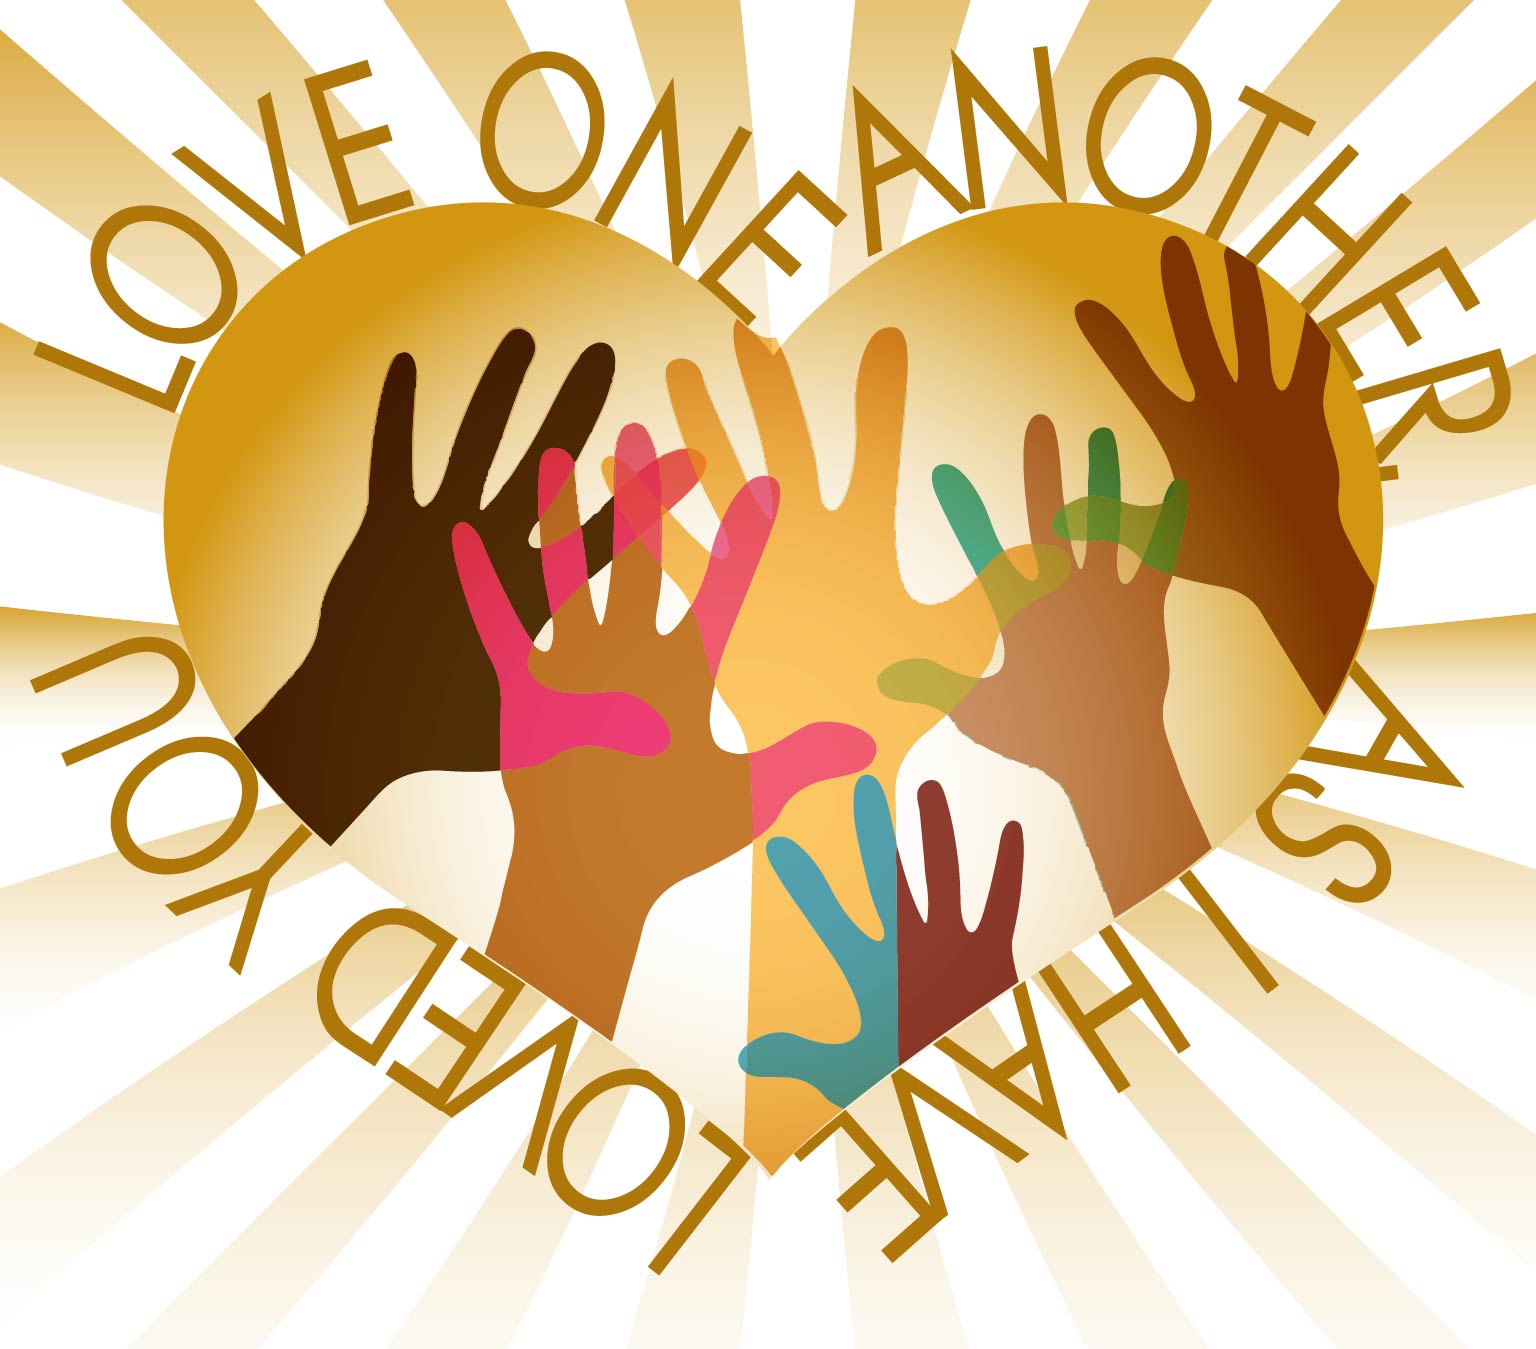 Love One Another – Diocesan